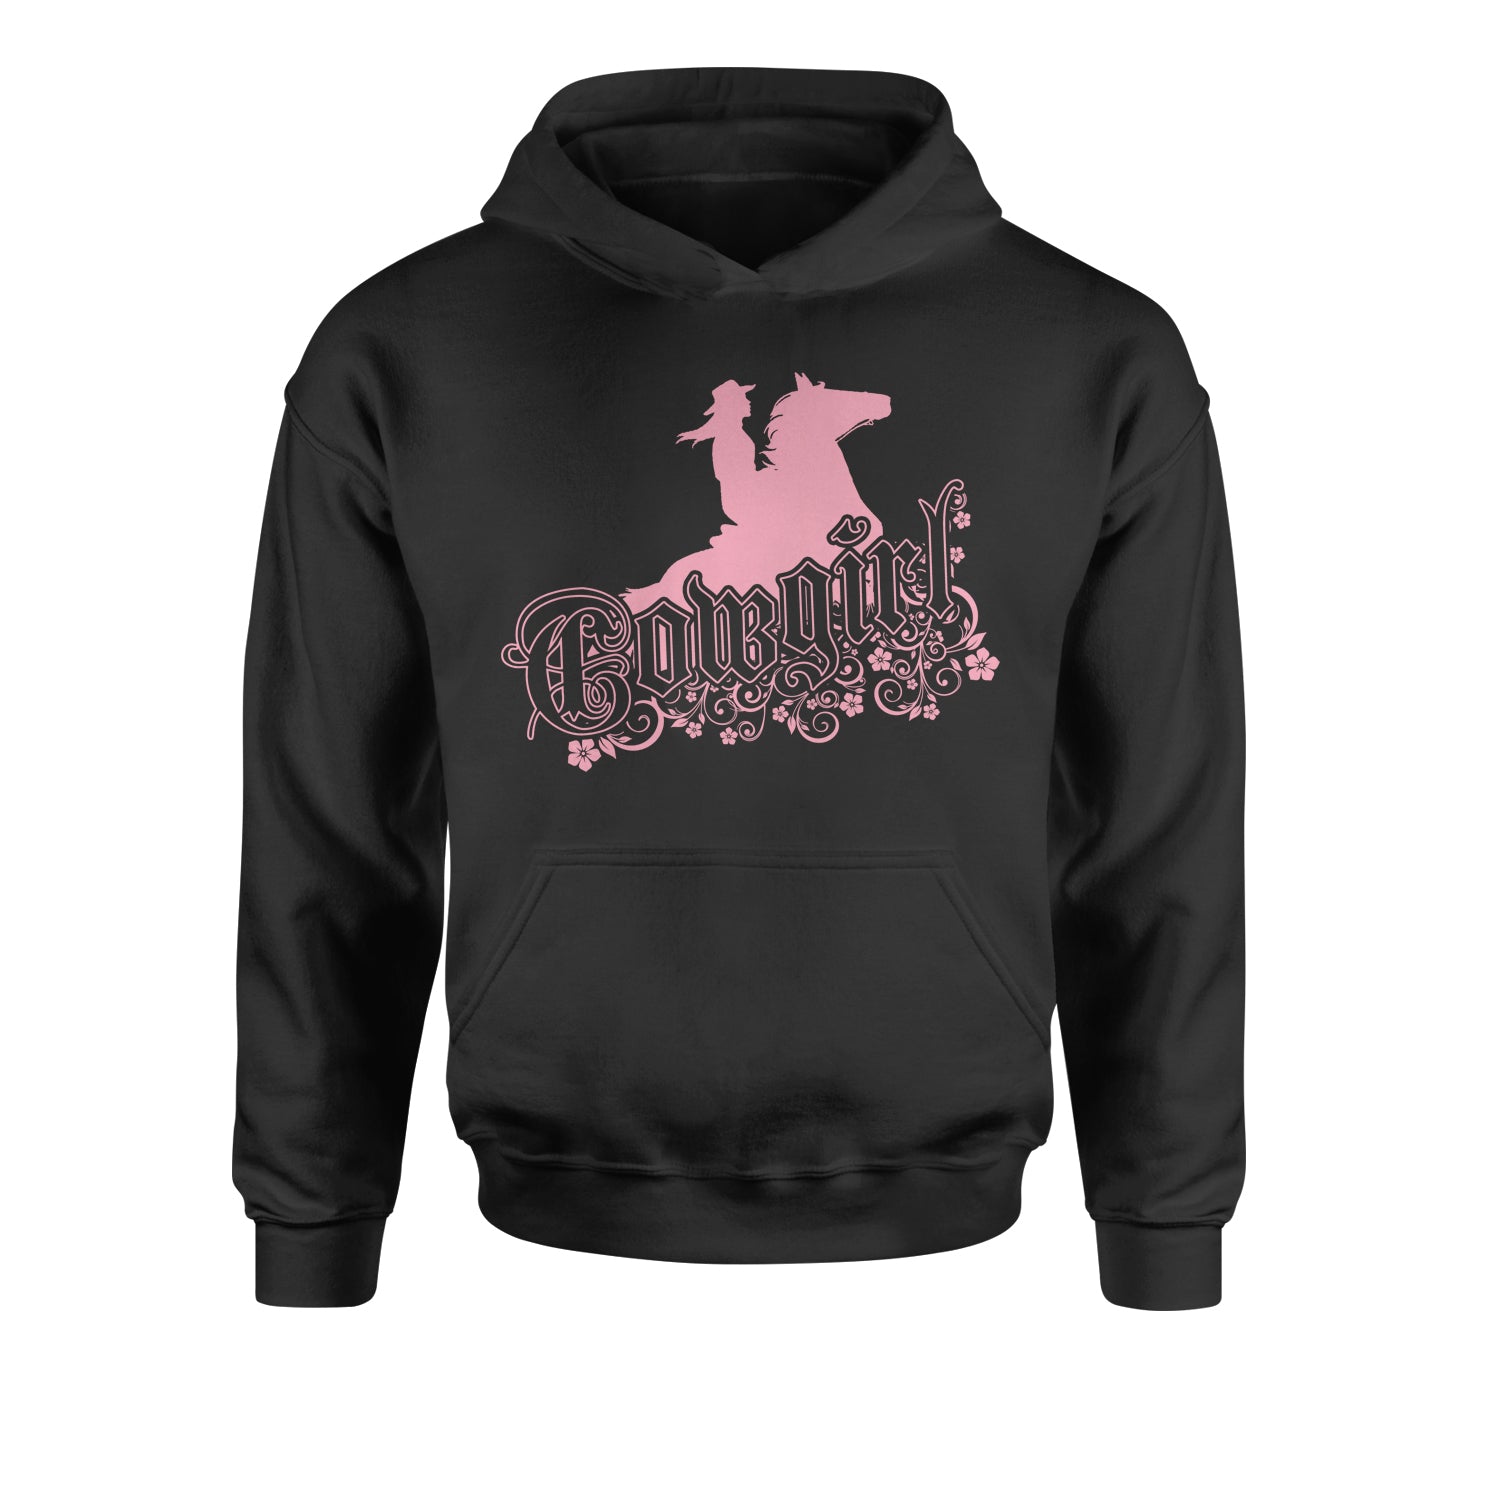 Cowgirl Riding A Horse Youth-Sized Hoodie country, daughter, farmers, girl, horses by Expression Tees